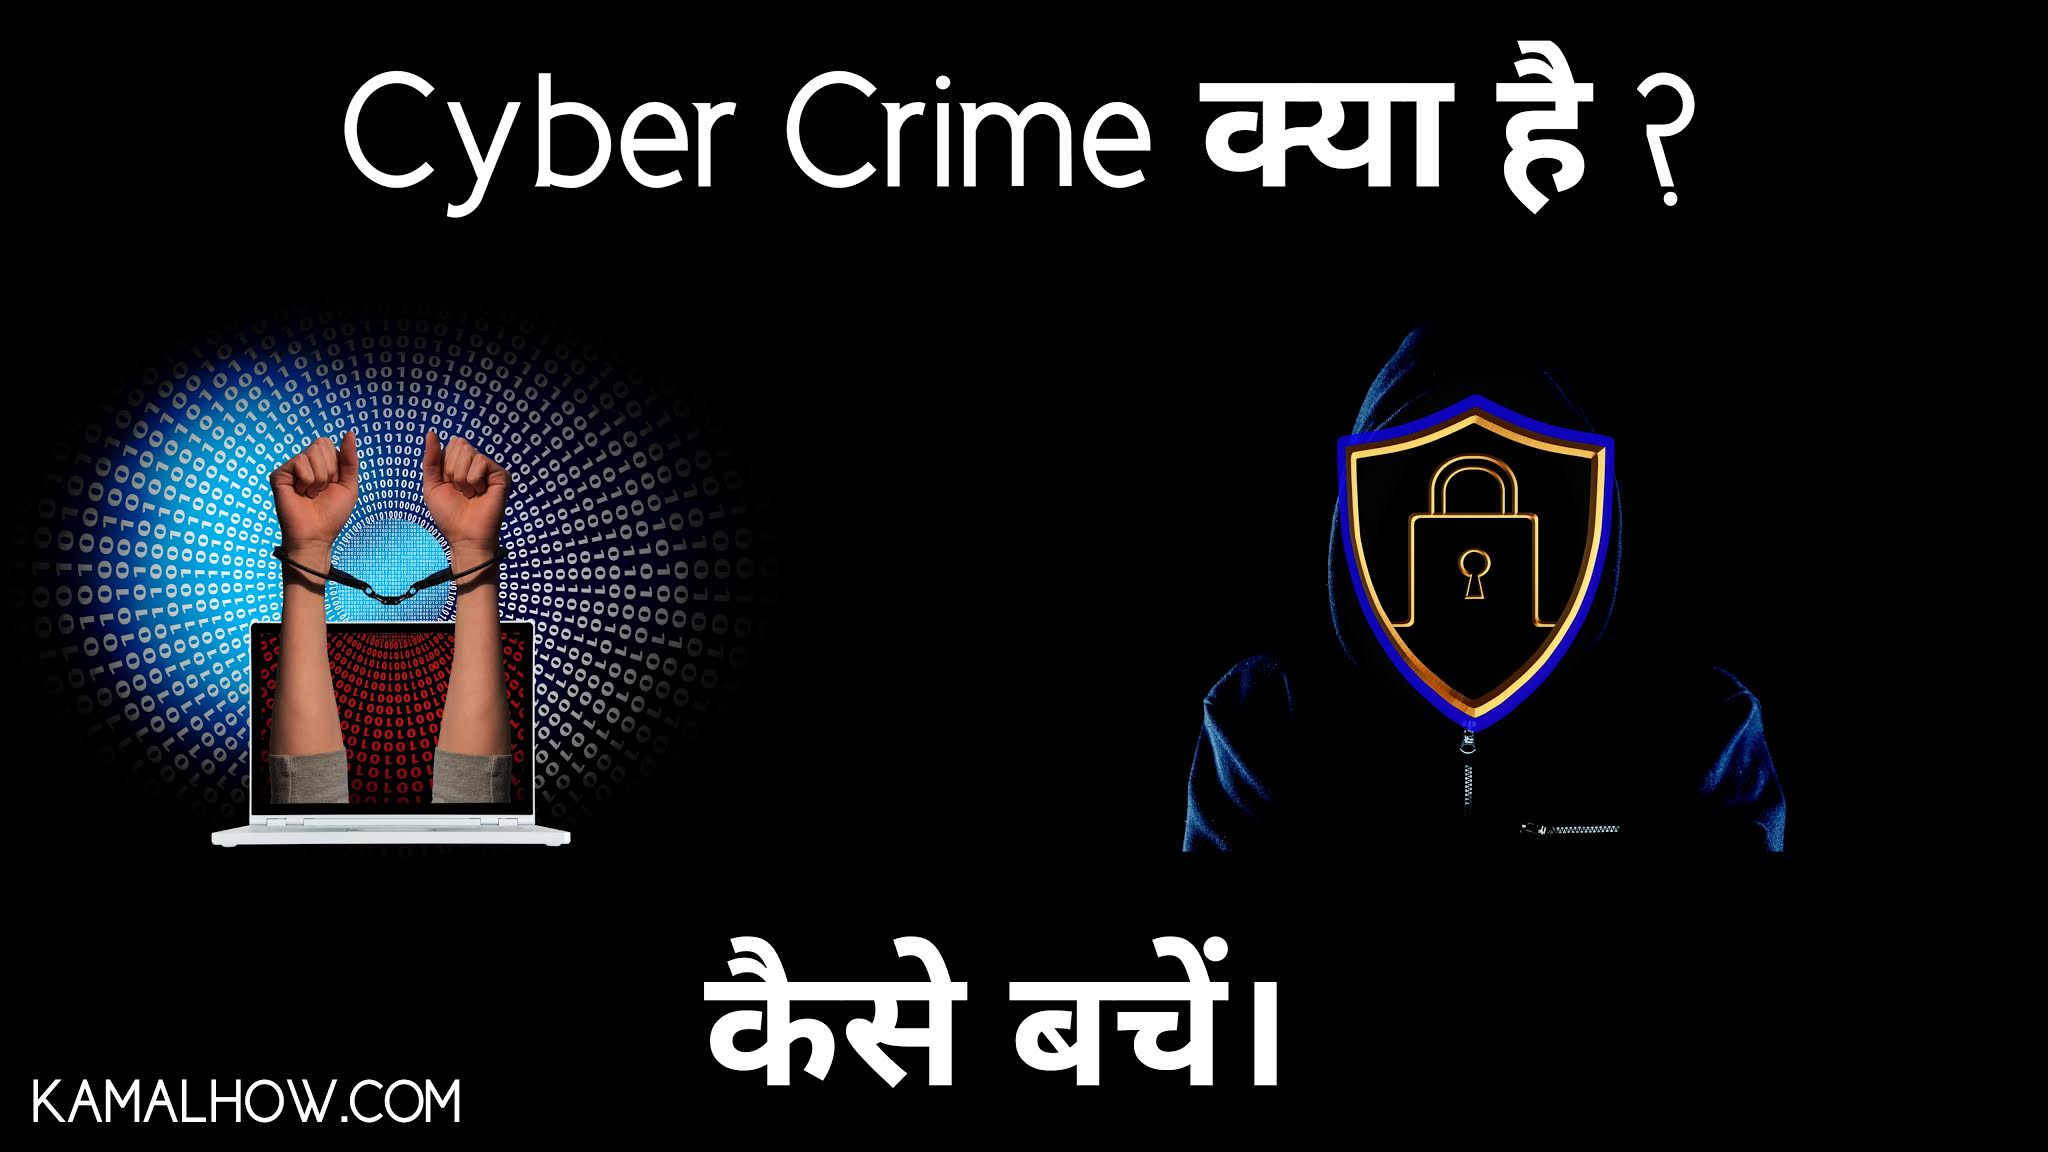 Cyber-crime-types-kya-hai-what-is-cyber-crime-in-hindi-hacking-cracking-Kamal-how-kamalhow-technology-knowledge-cyber-expert-cyber-security-cyber-attacks